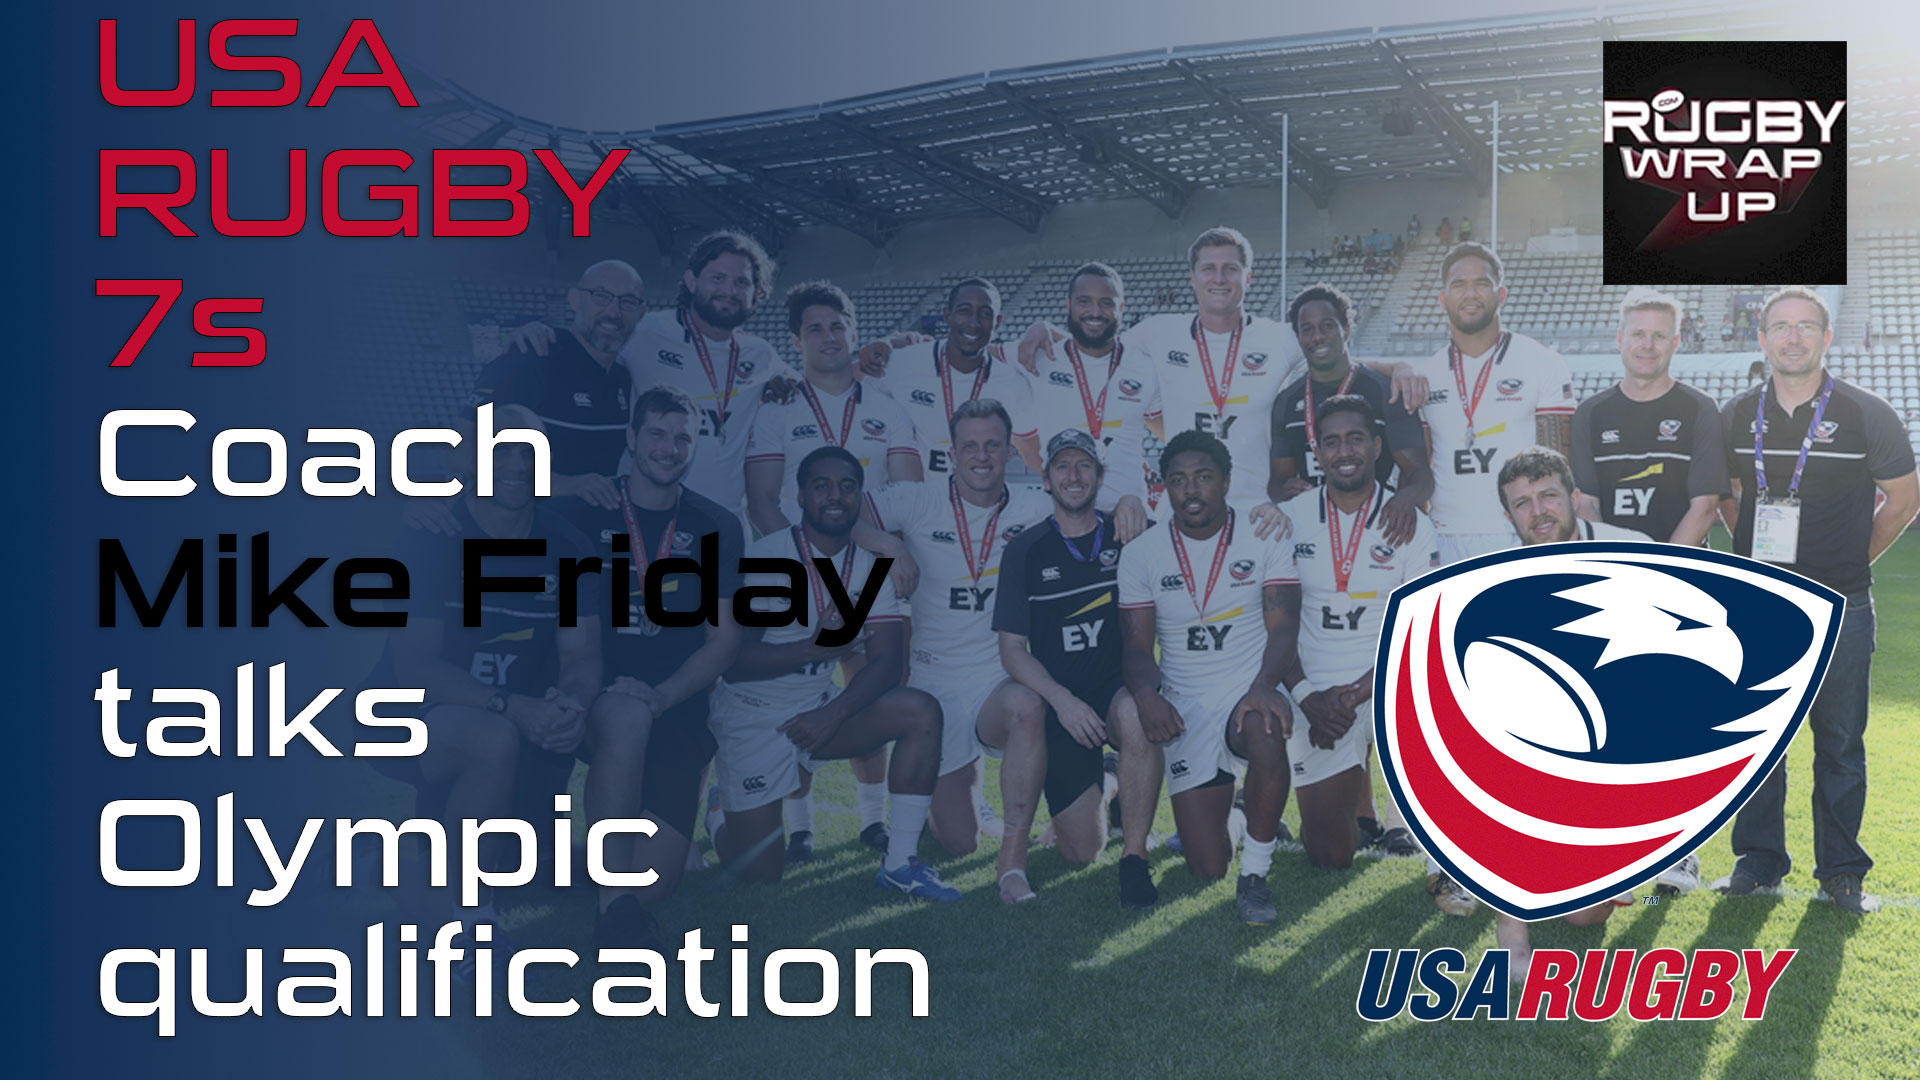 USA Rugby Men's 7s Coach Mike Friday with Matt McCarthy & Steve Lewis | RUGBY WRAP UP